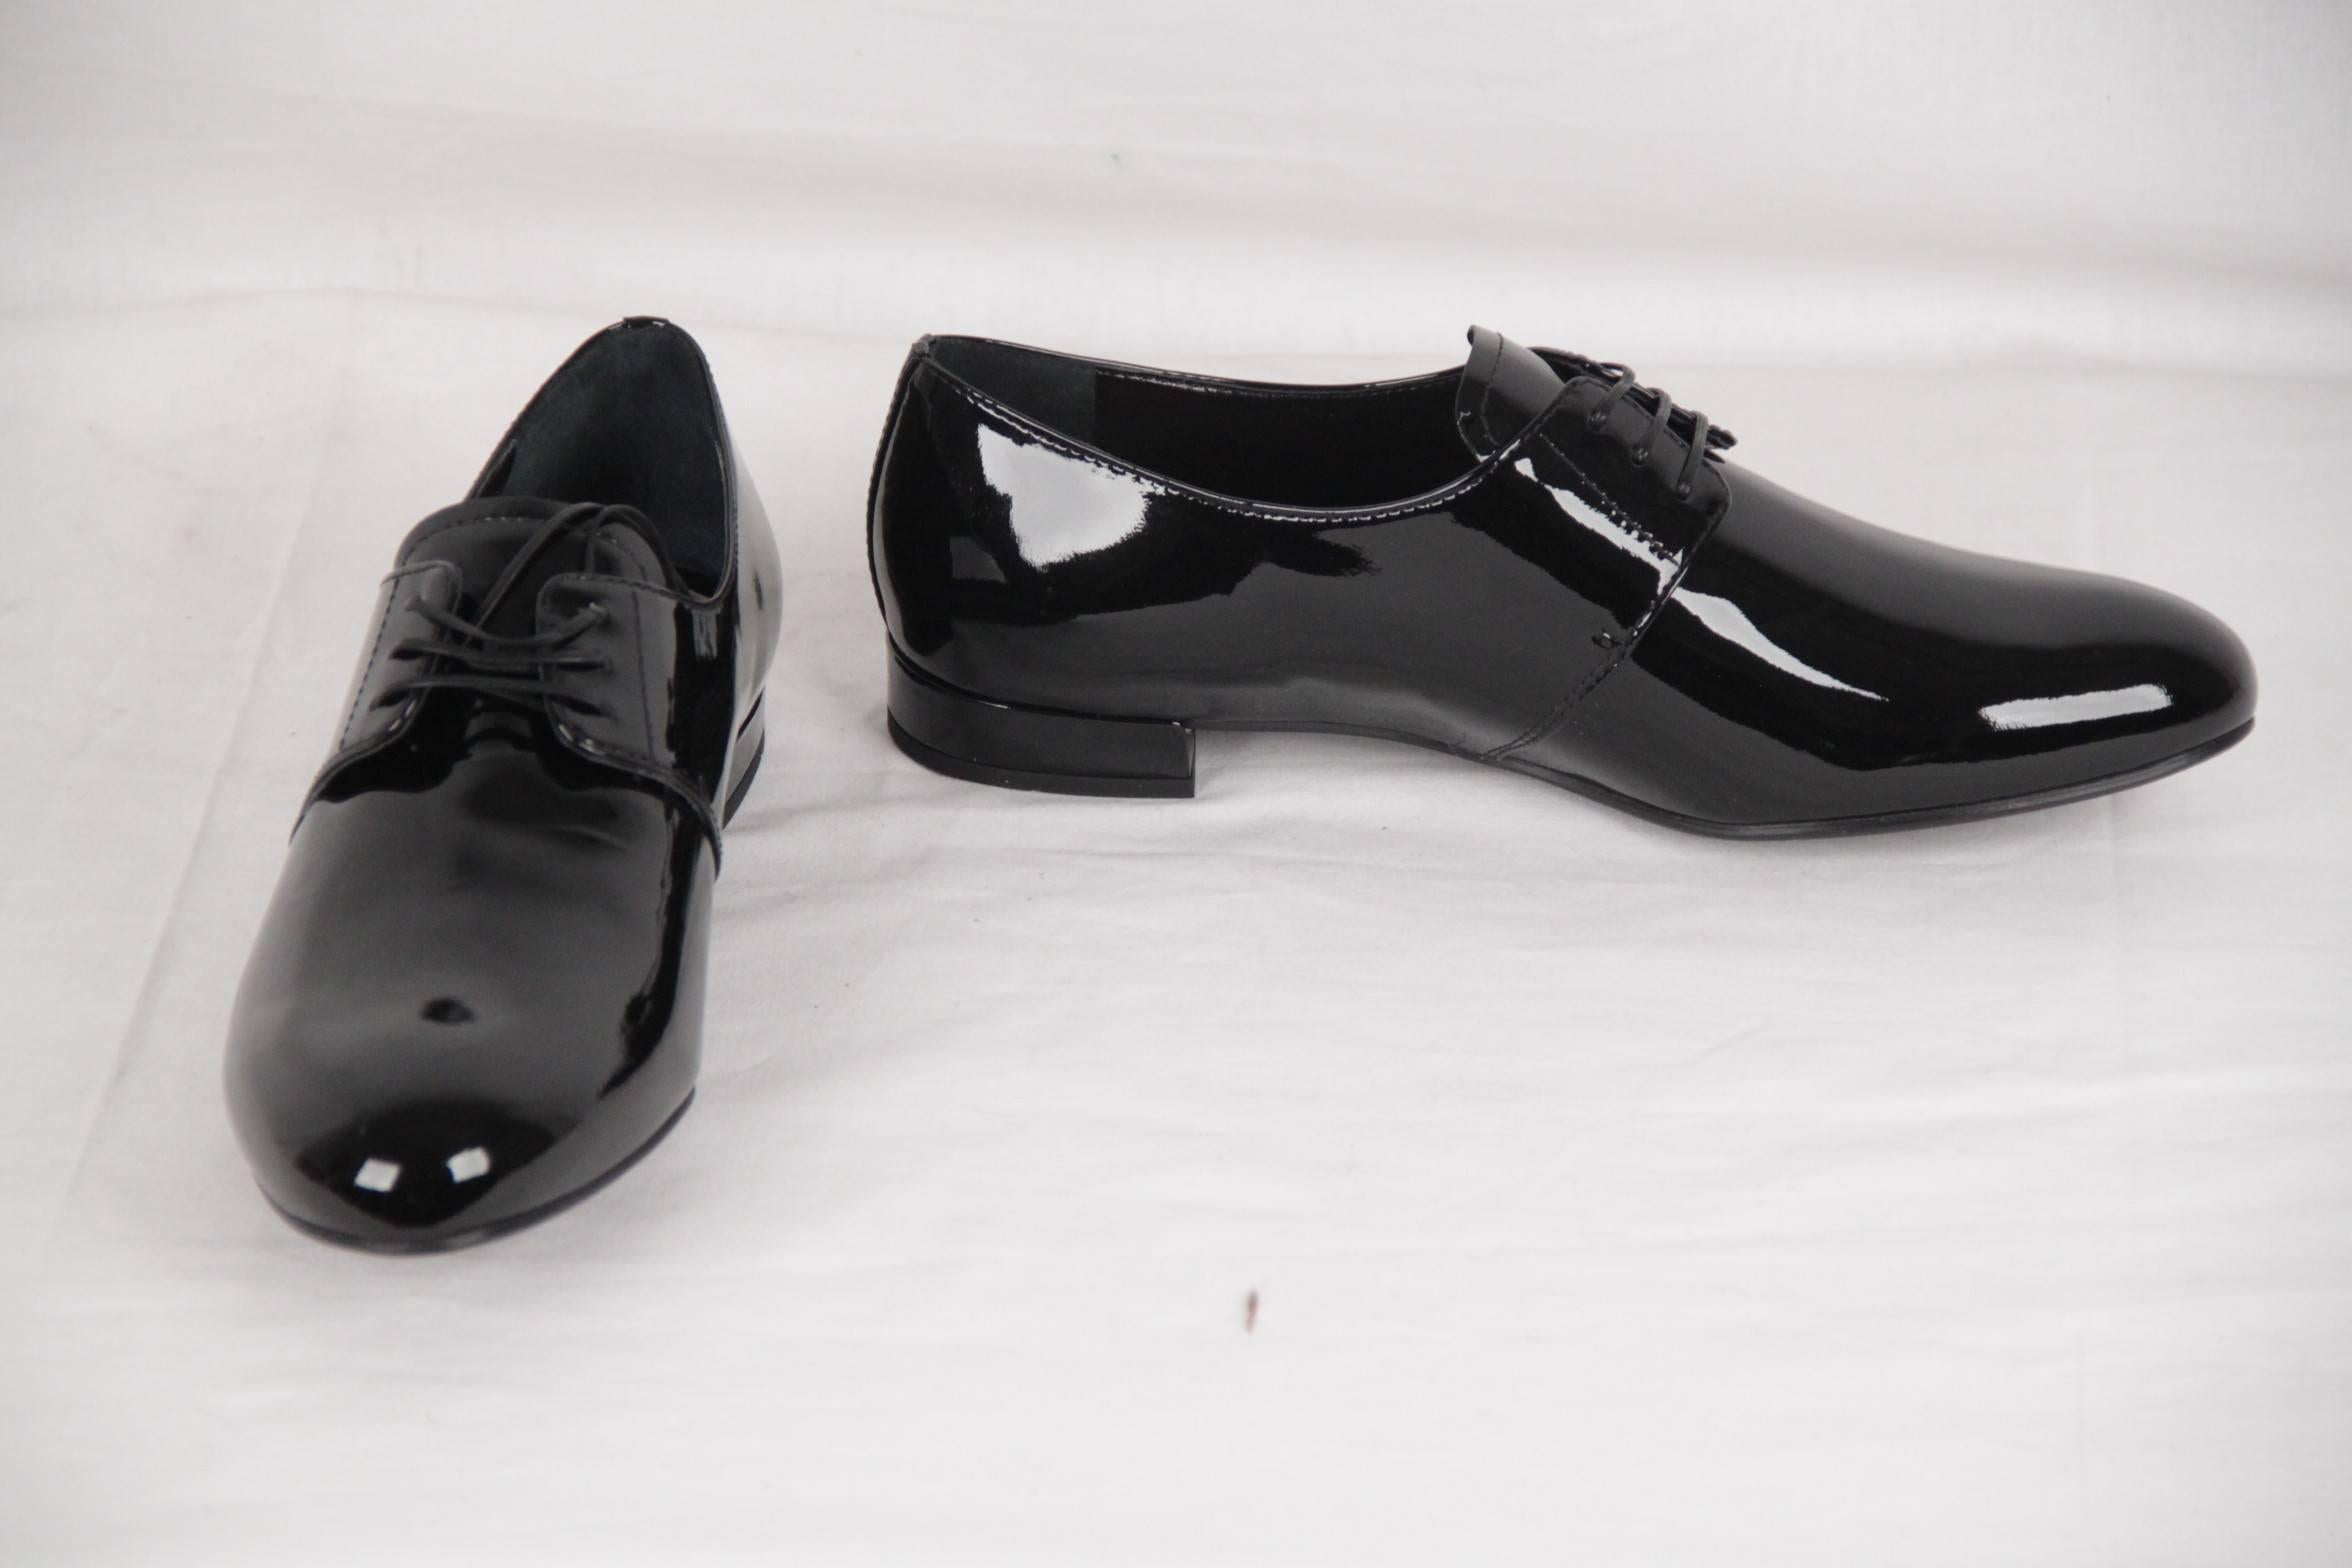 Brand: PRADA - Made in Italy
Condition: A+ :MINT CONDITION! Mint item. Never worn or used
Condition detail: They will come with their original PRADA box
Further Comments:
- Size 40 1/2
- Rubber outsoles
Fabric / Material: Patent Leather
Color